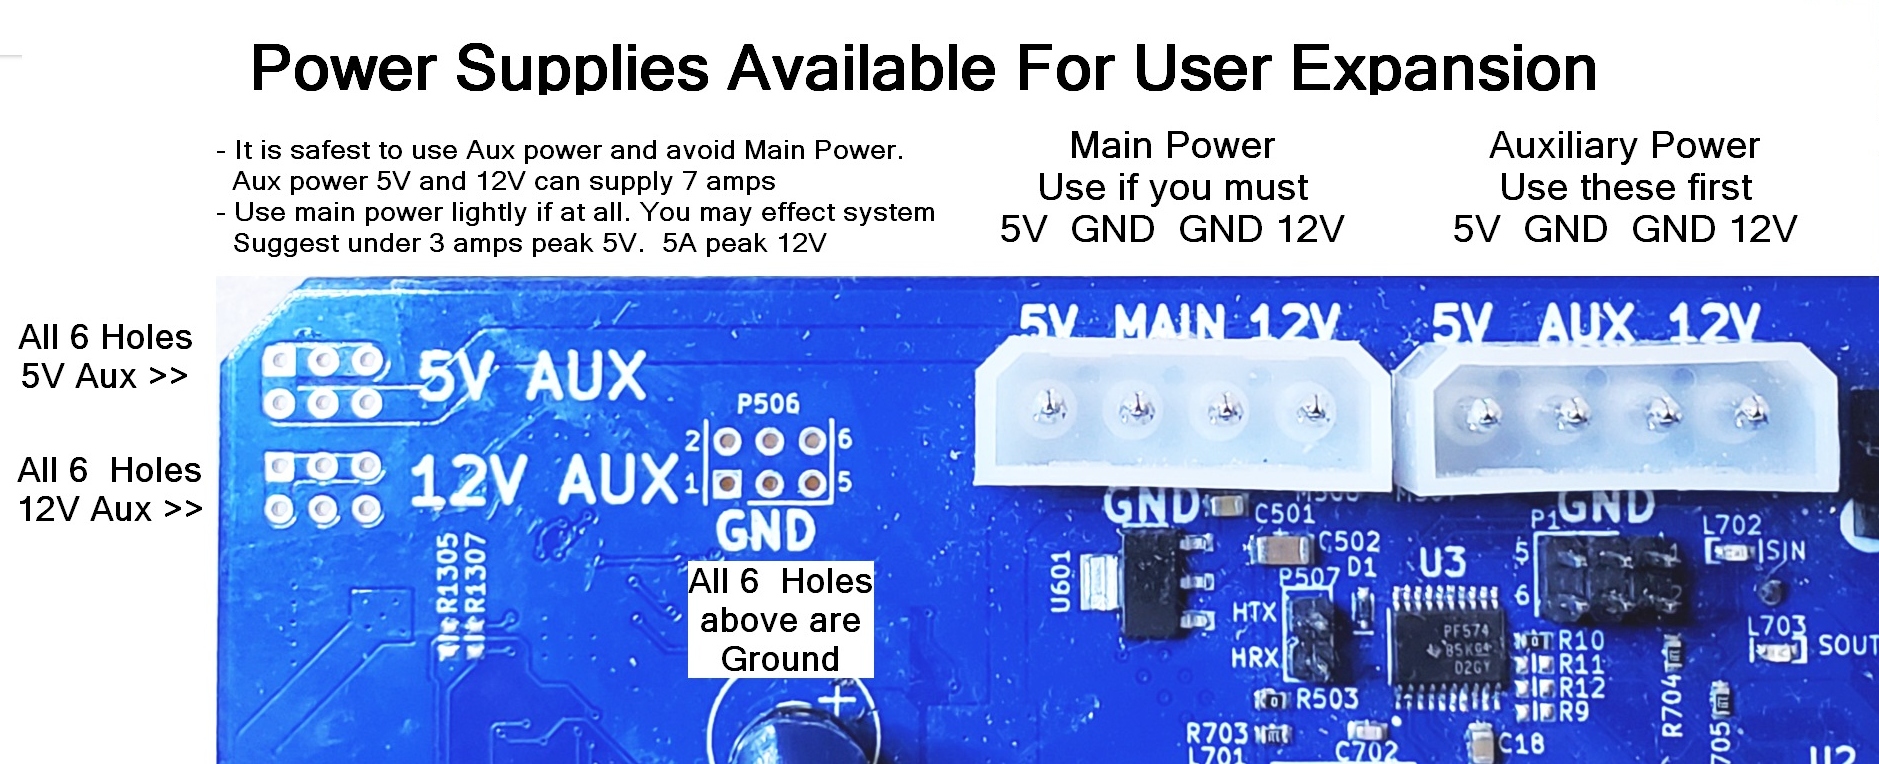 Power Supply Connections For User Uses